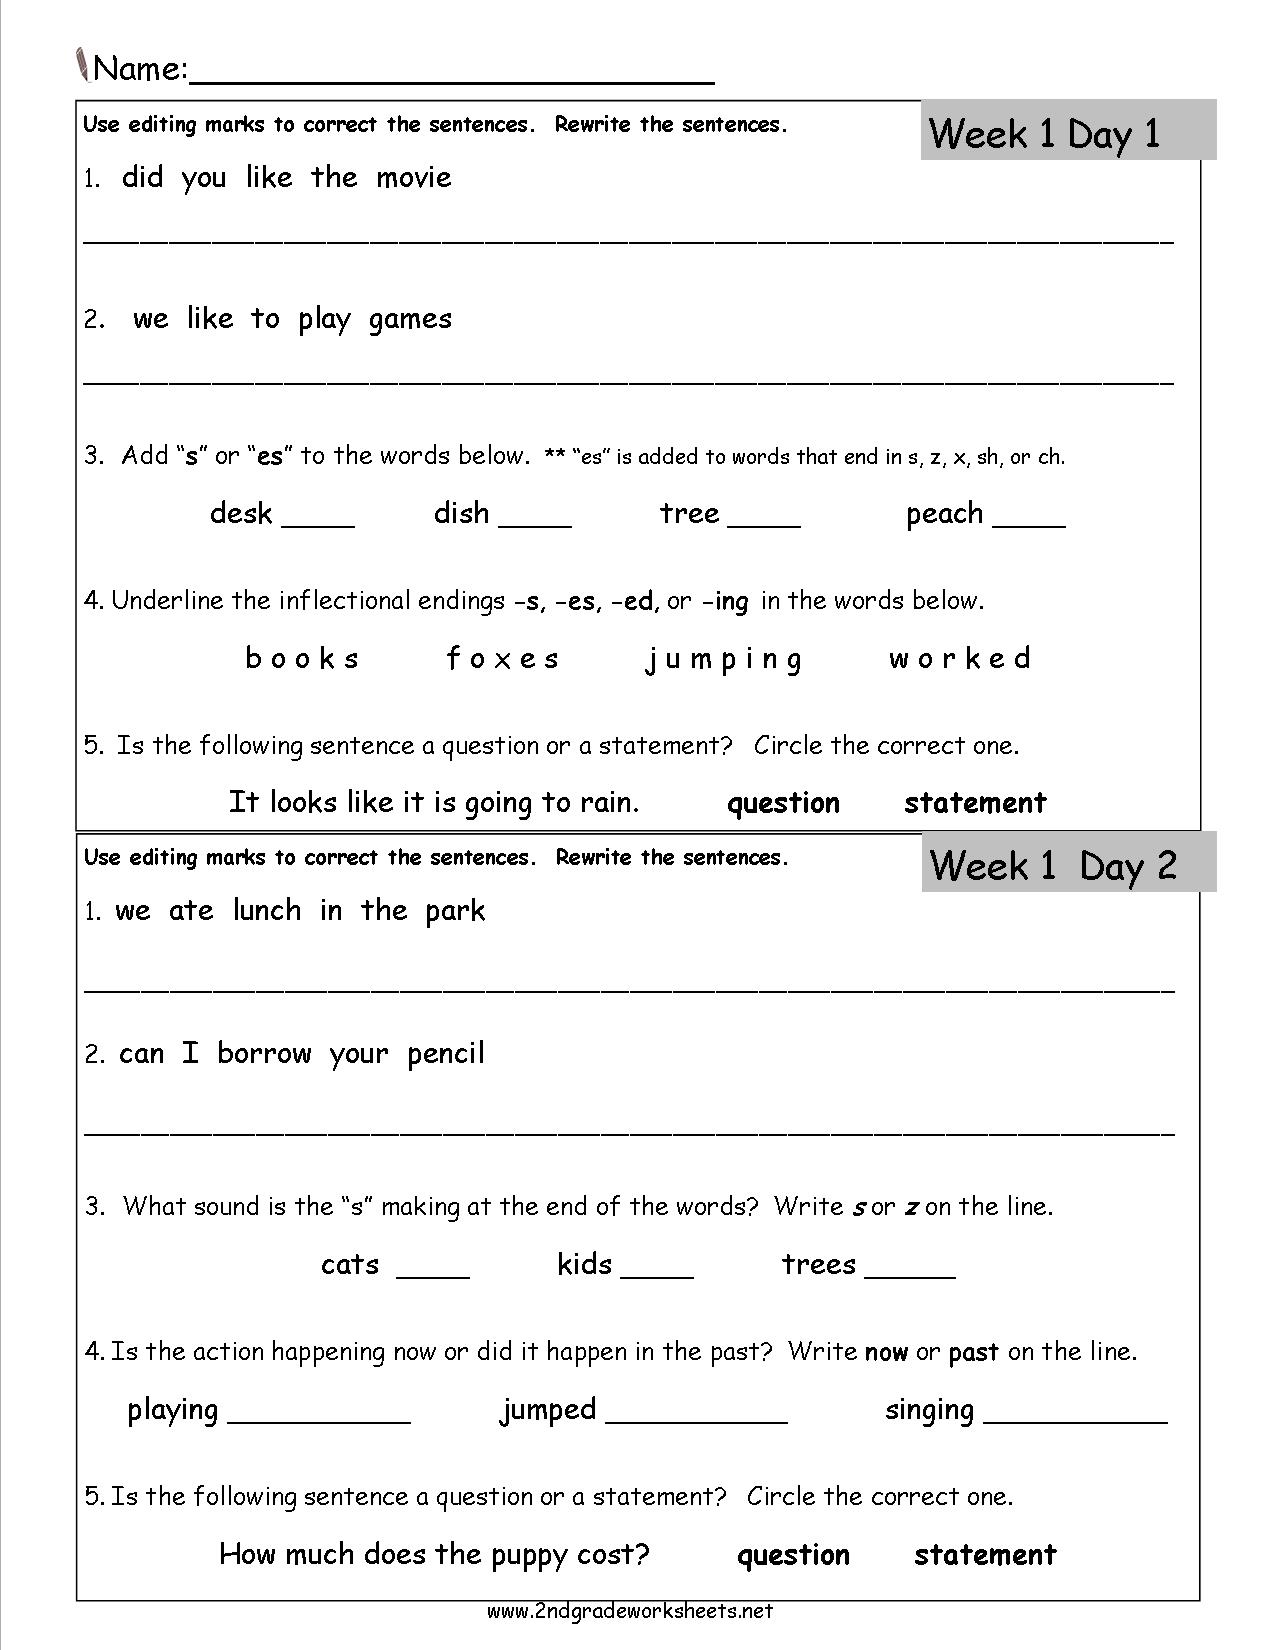 language-arts-worksheets-2nd-grade-smiling-and-shining-in-second-grade-october-daily